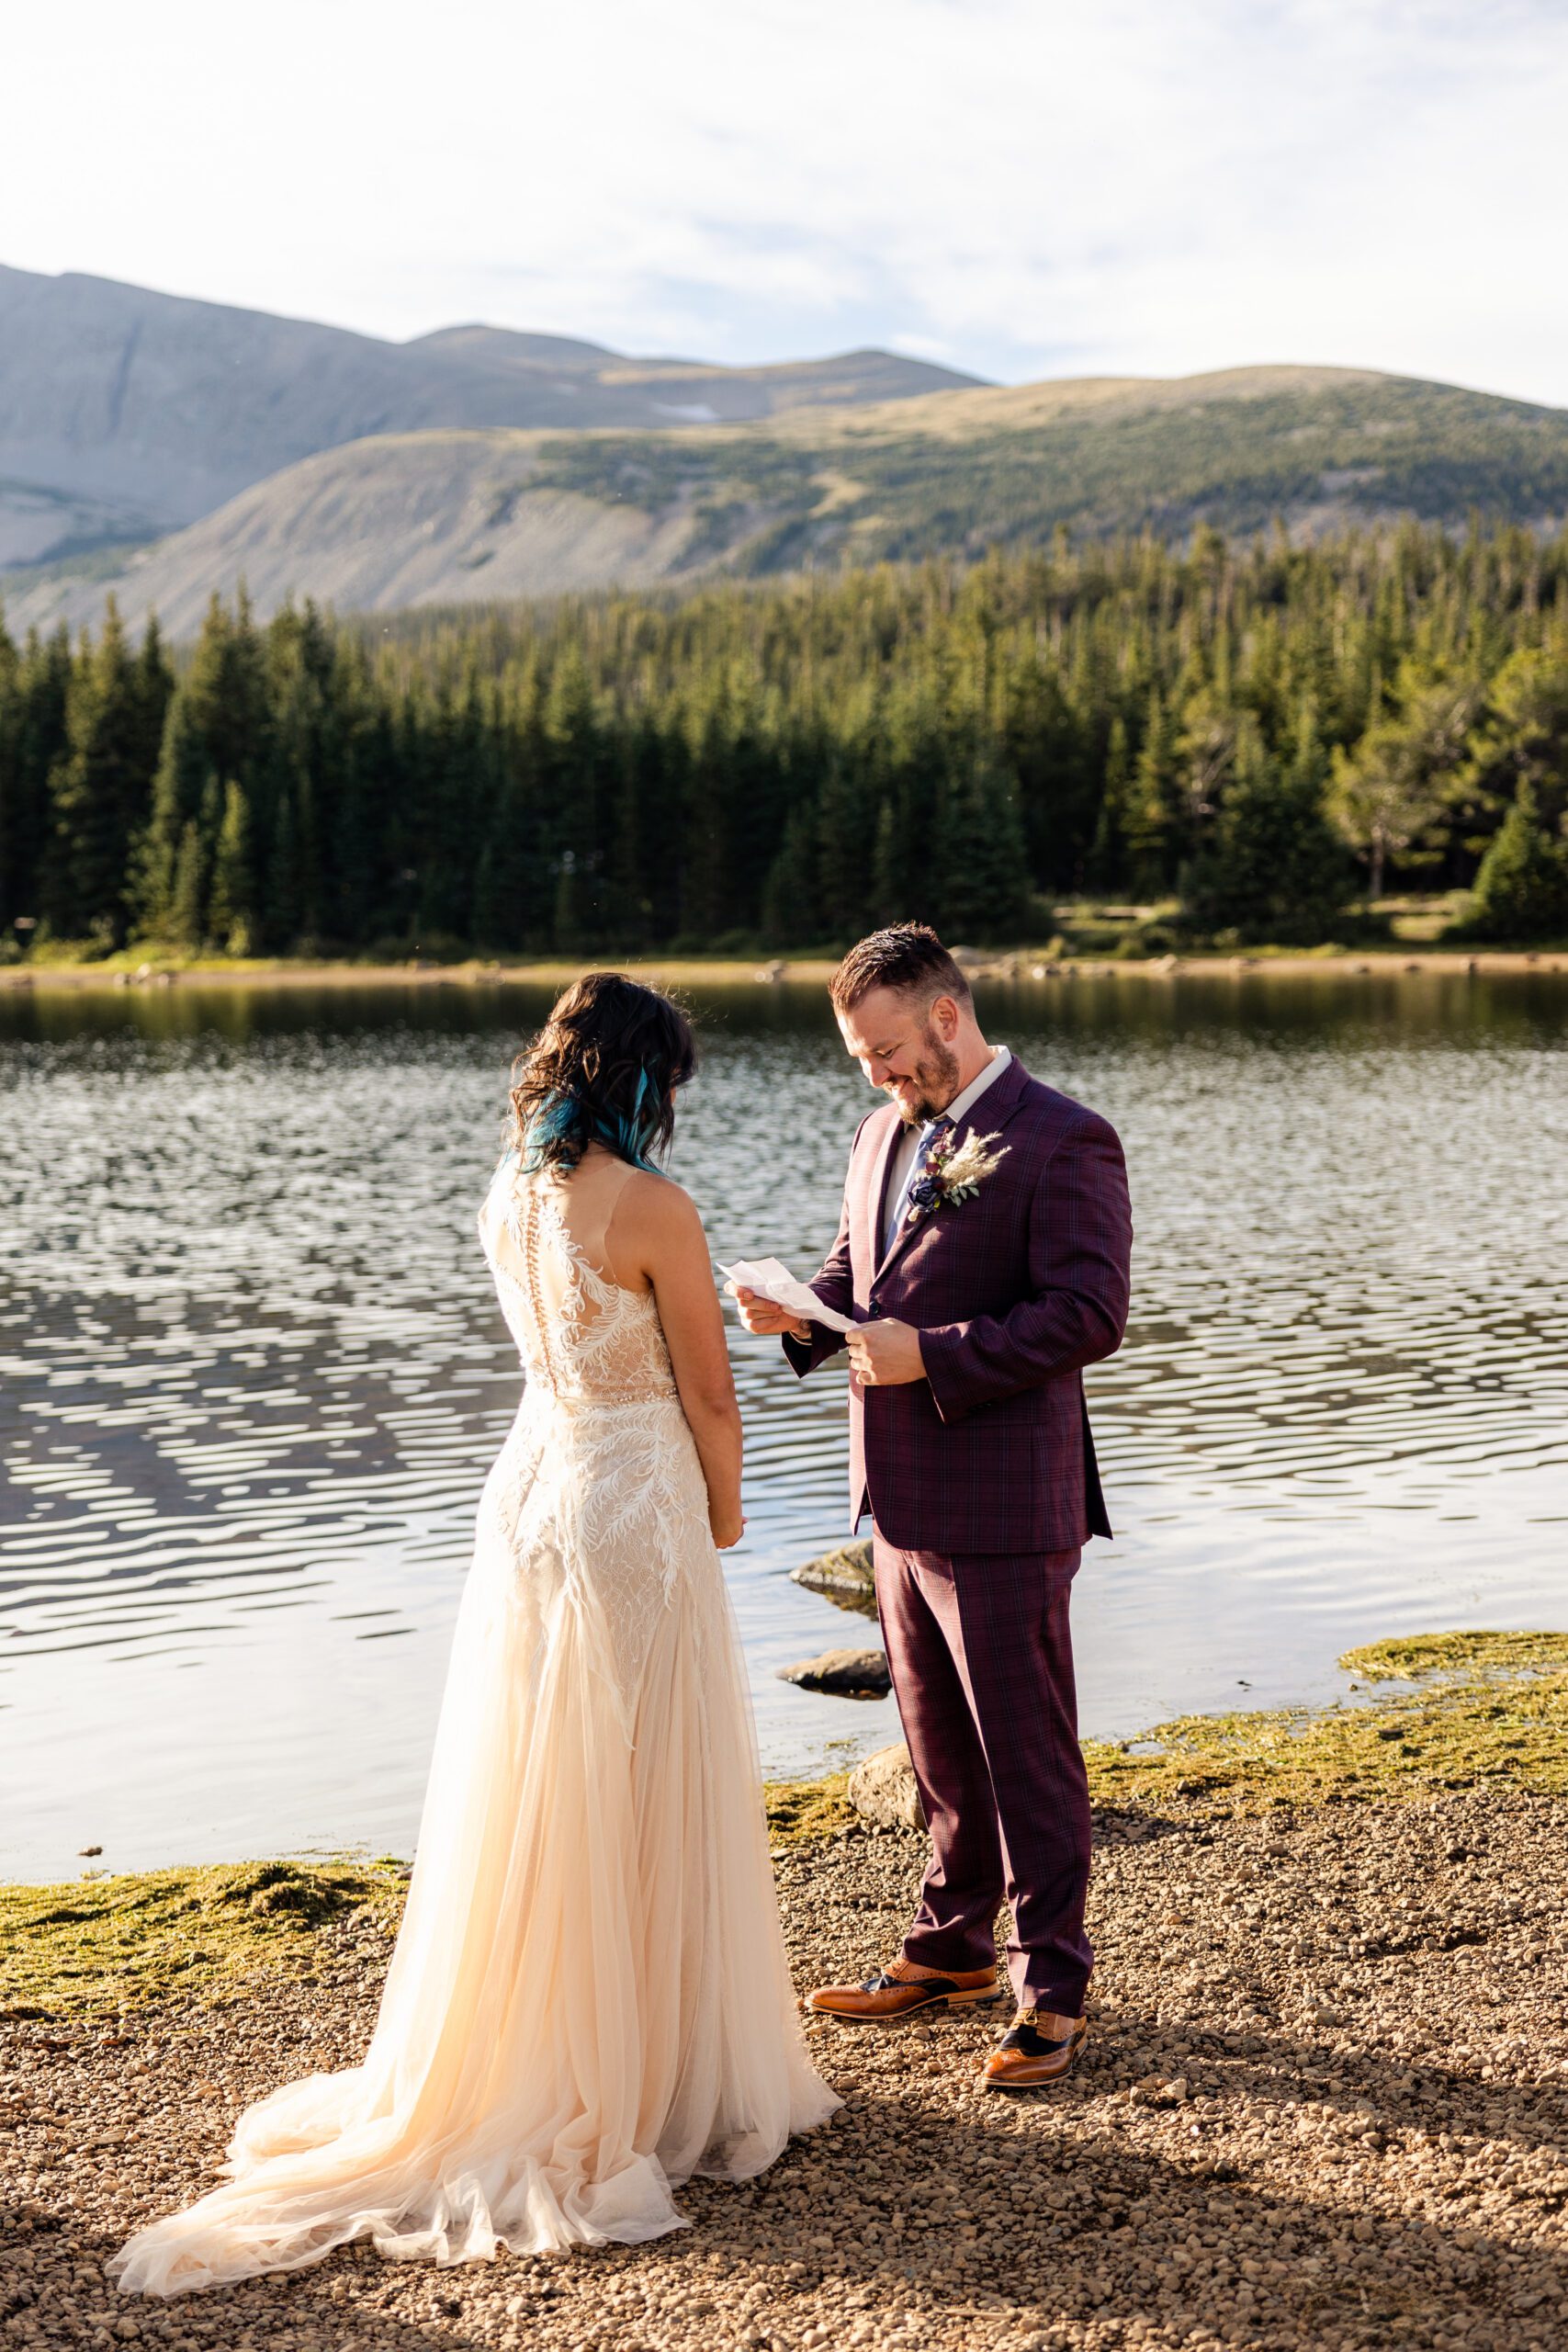 Groom reading his vows to his bride during their Brainard Lake Elopement.